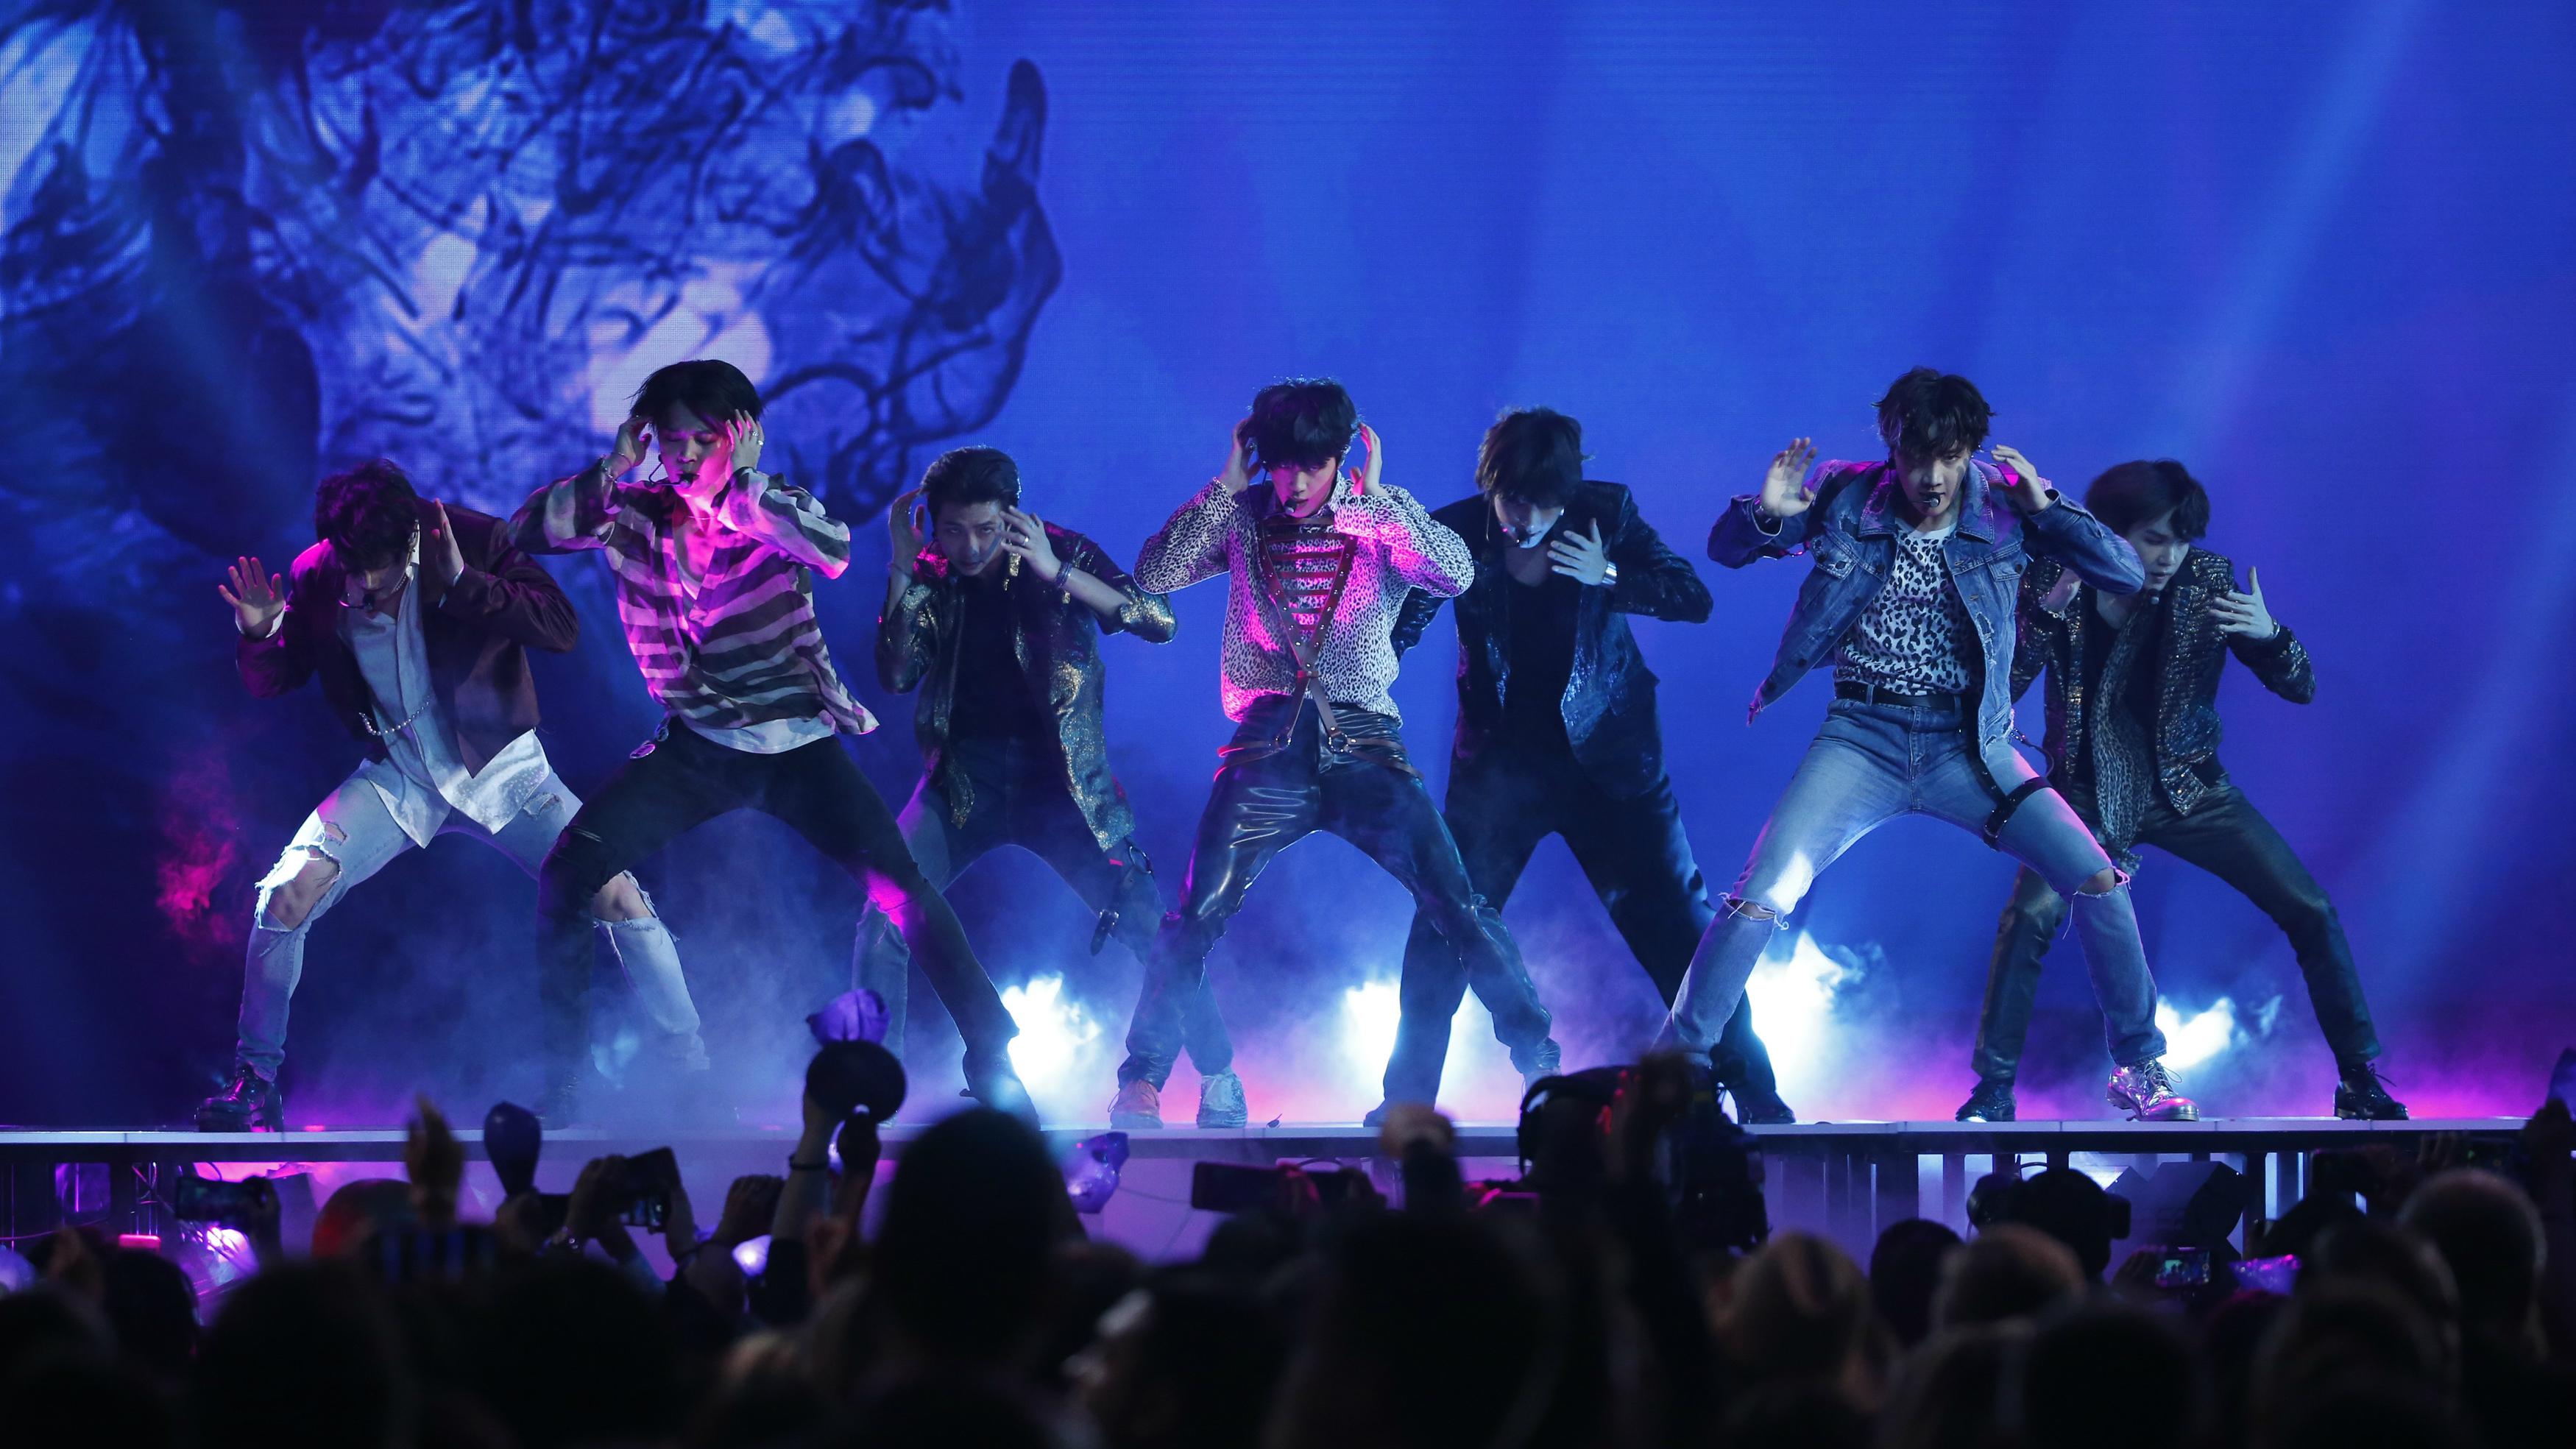 kpop live wallpaper,performance,entertainment,performing arts,stage,concert